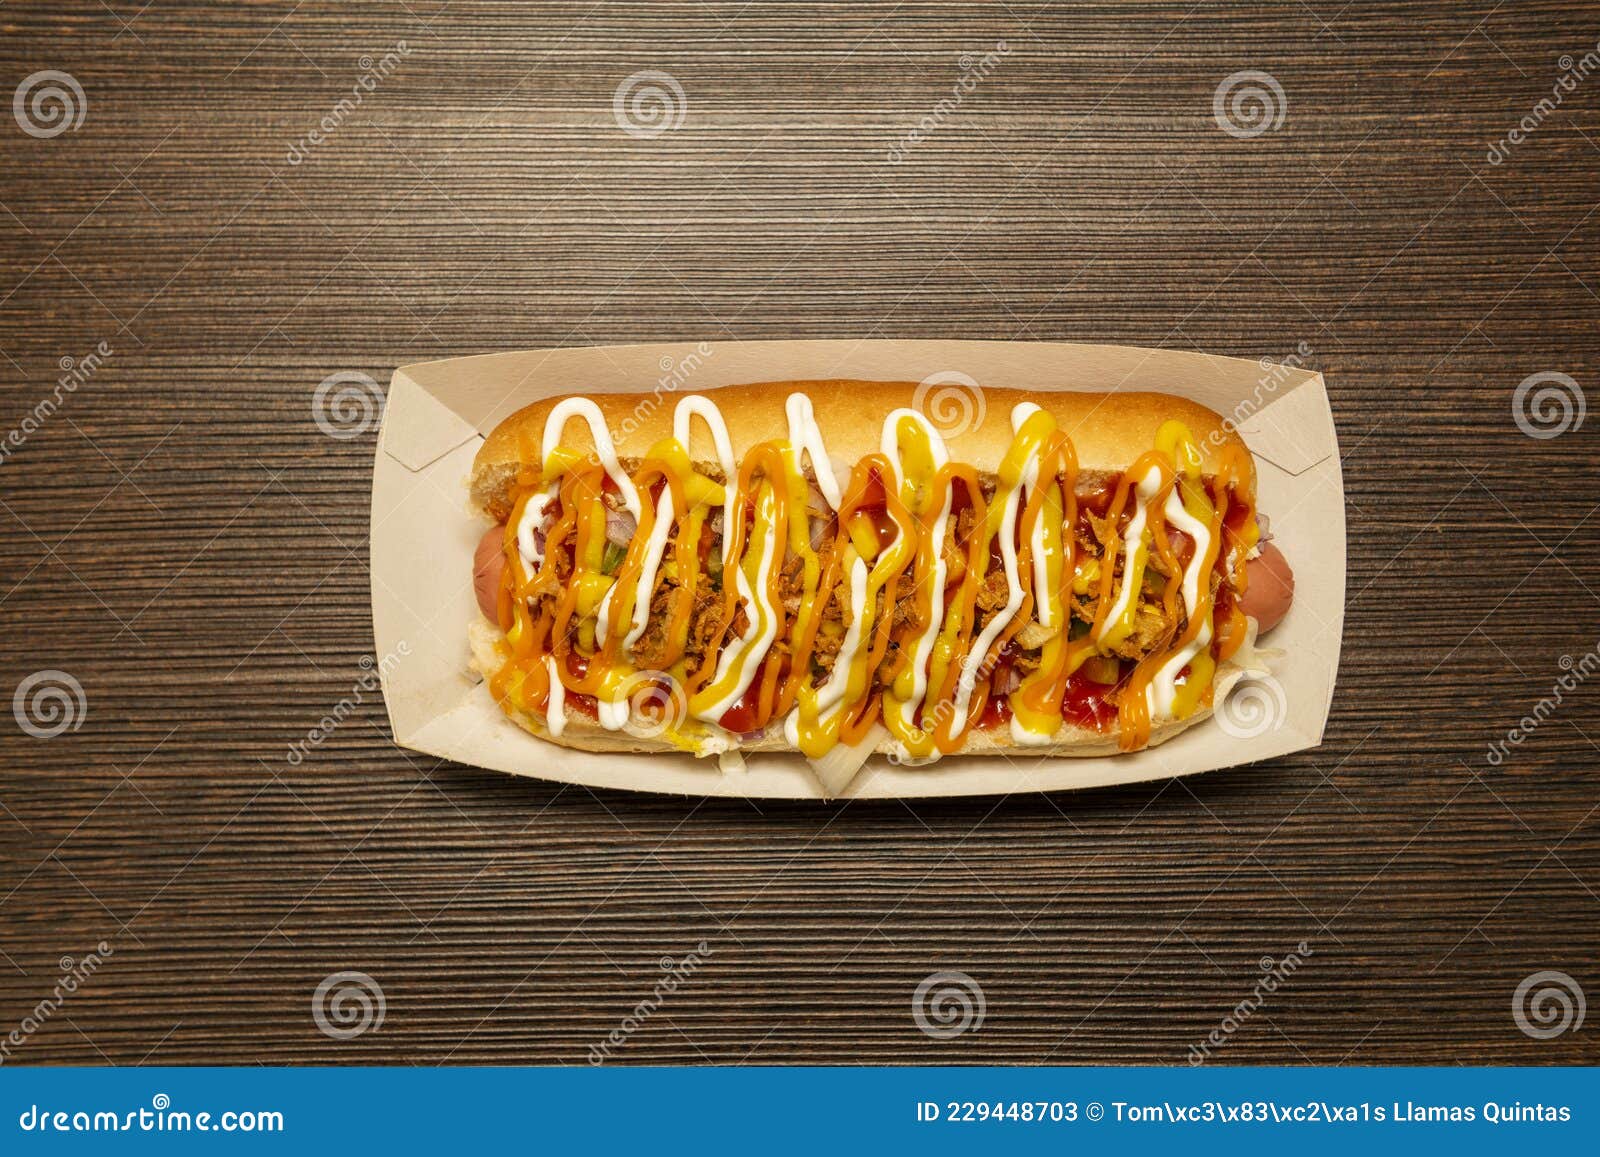 top view image of hot dog with sausage covered by lots of sauces